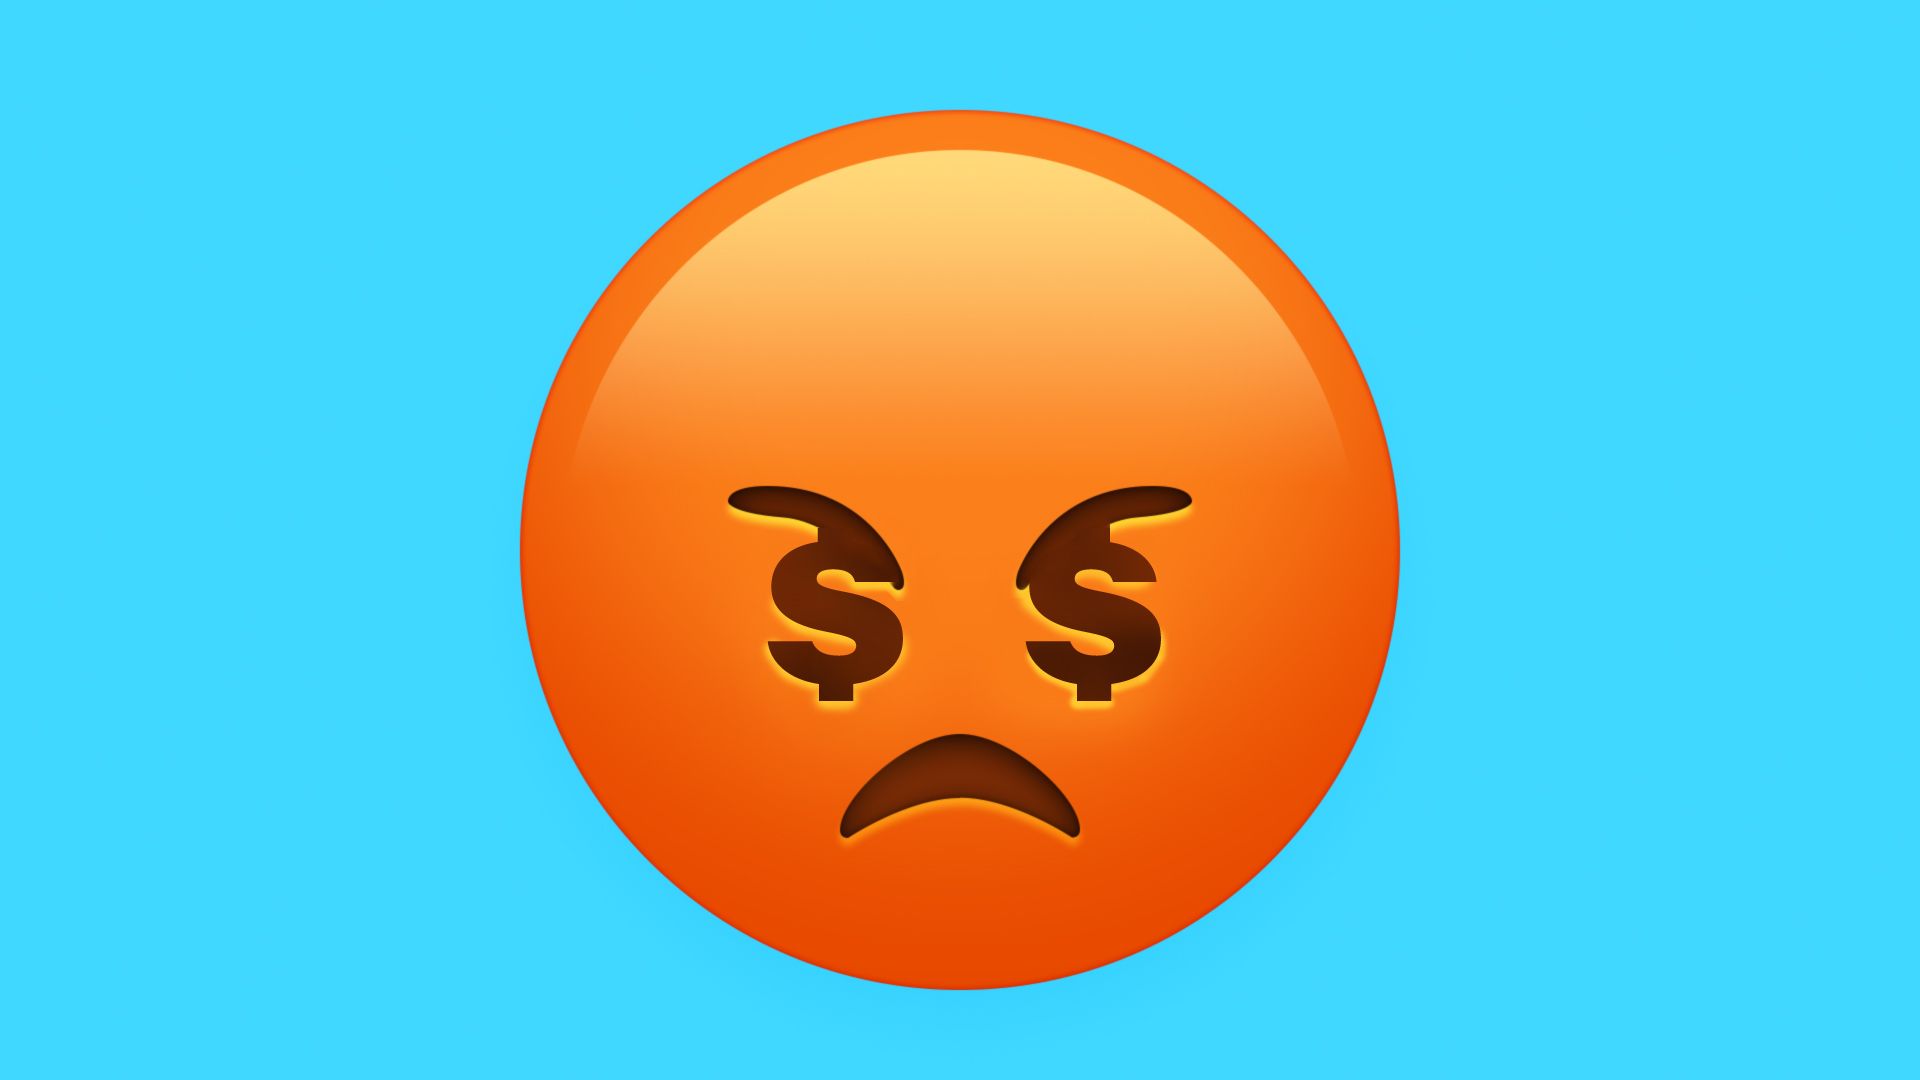 A frowning emoticon with dollar signs for eyes 